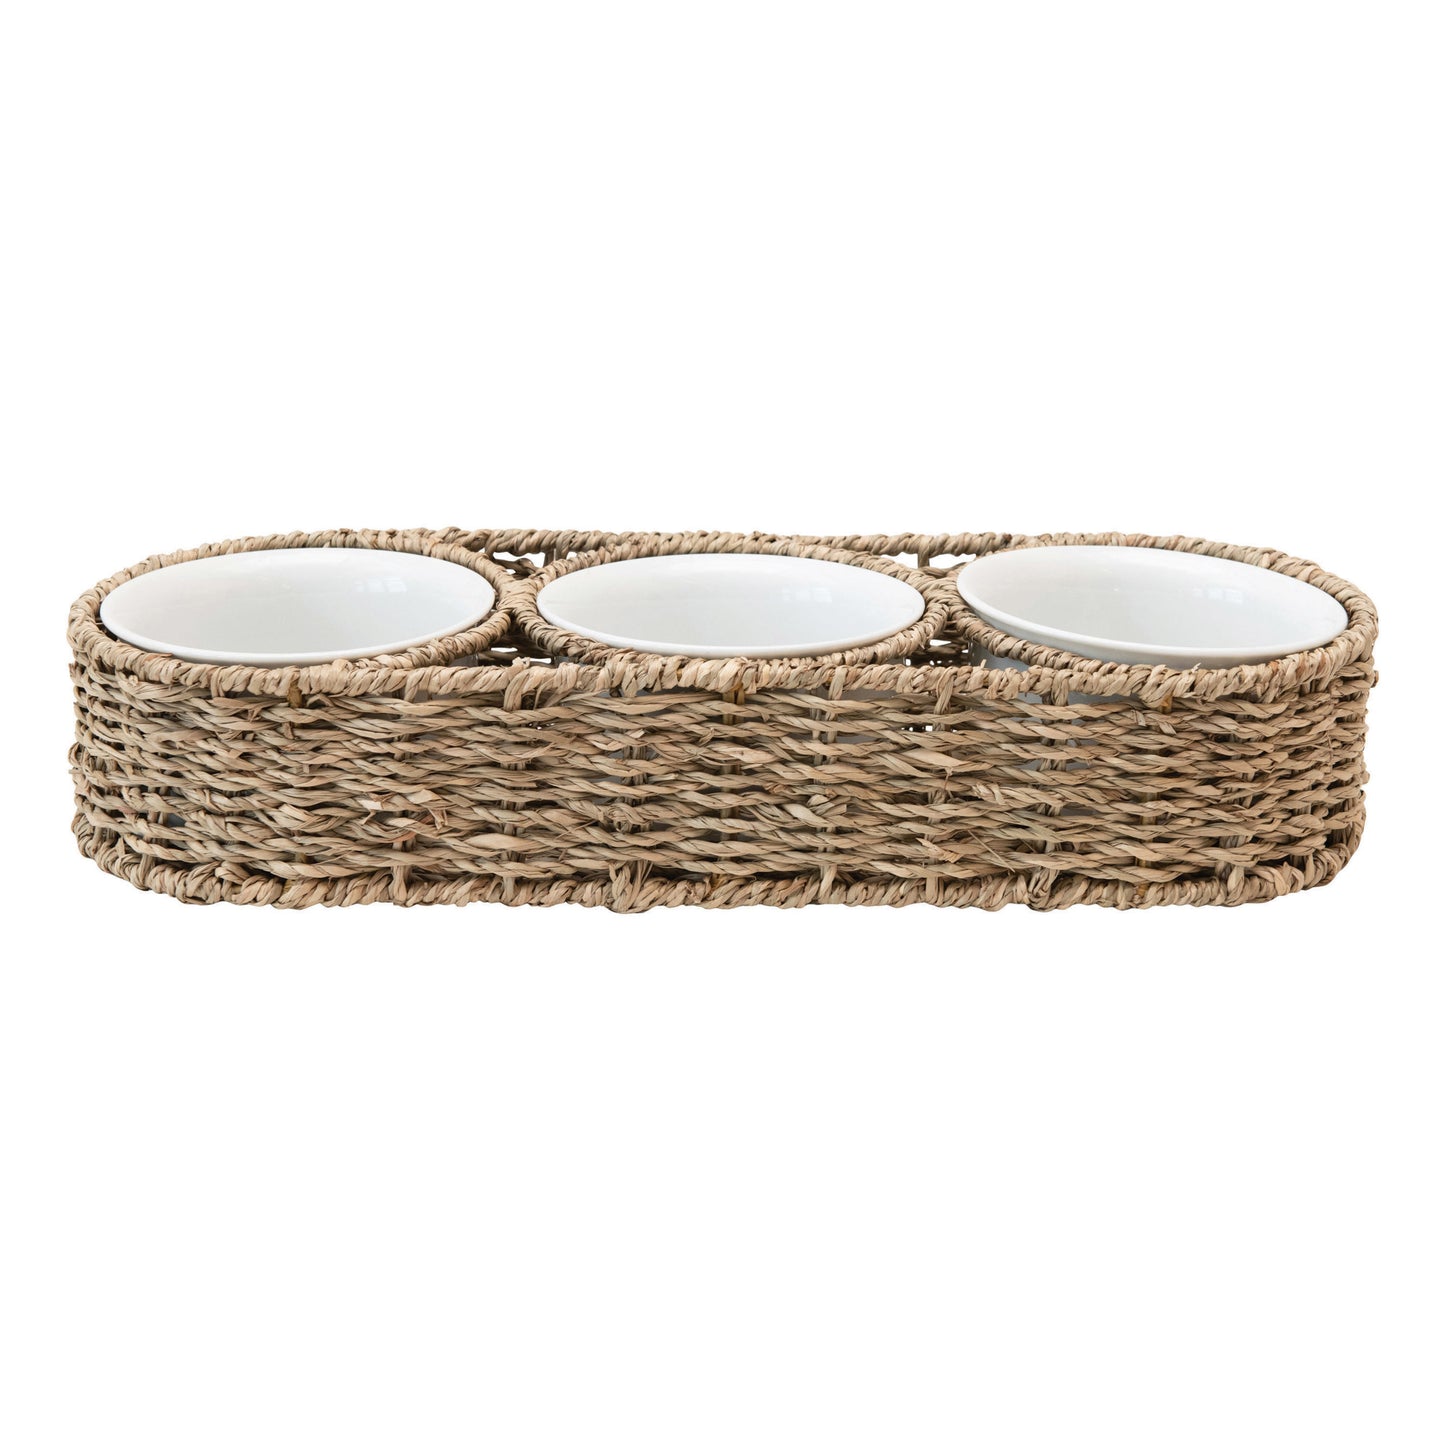 Hand-Woven Basket with Ceramic Bowls, Set of 4